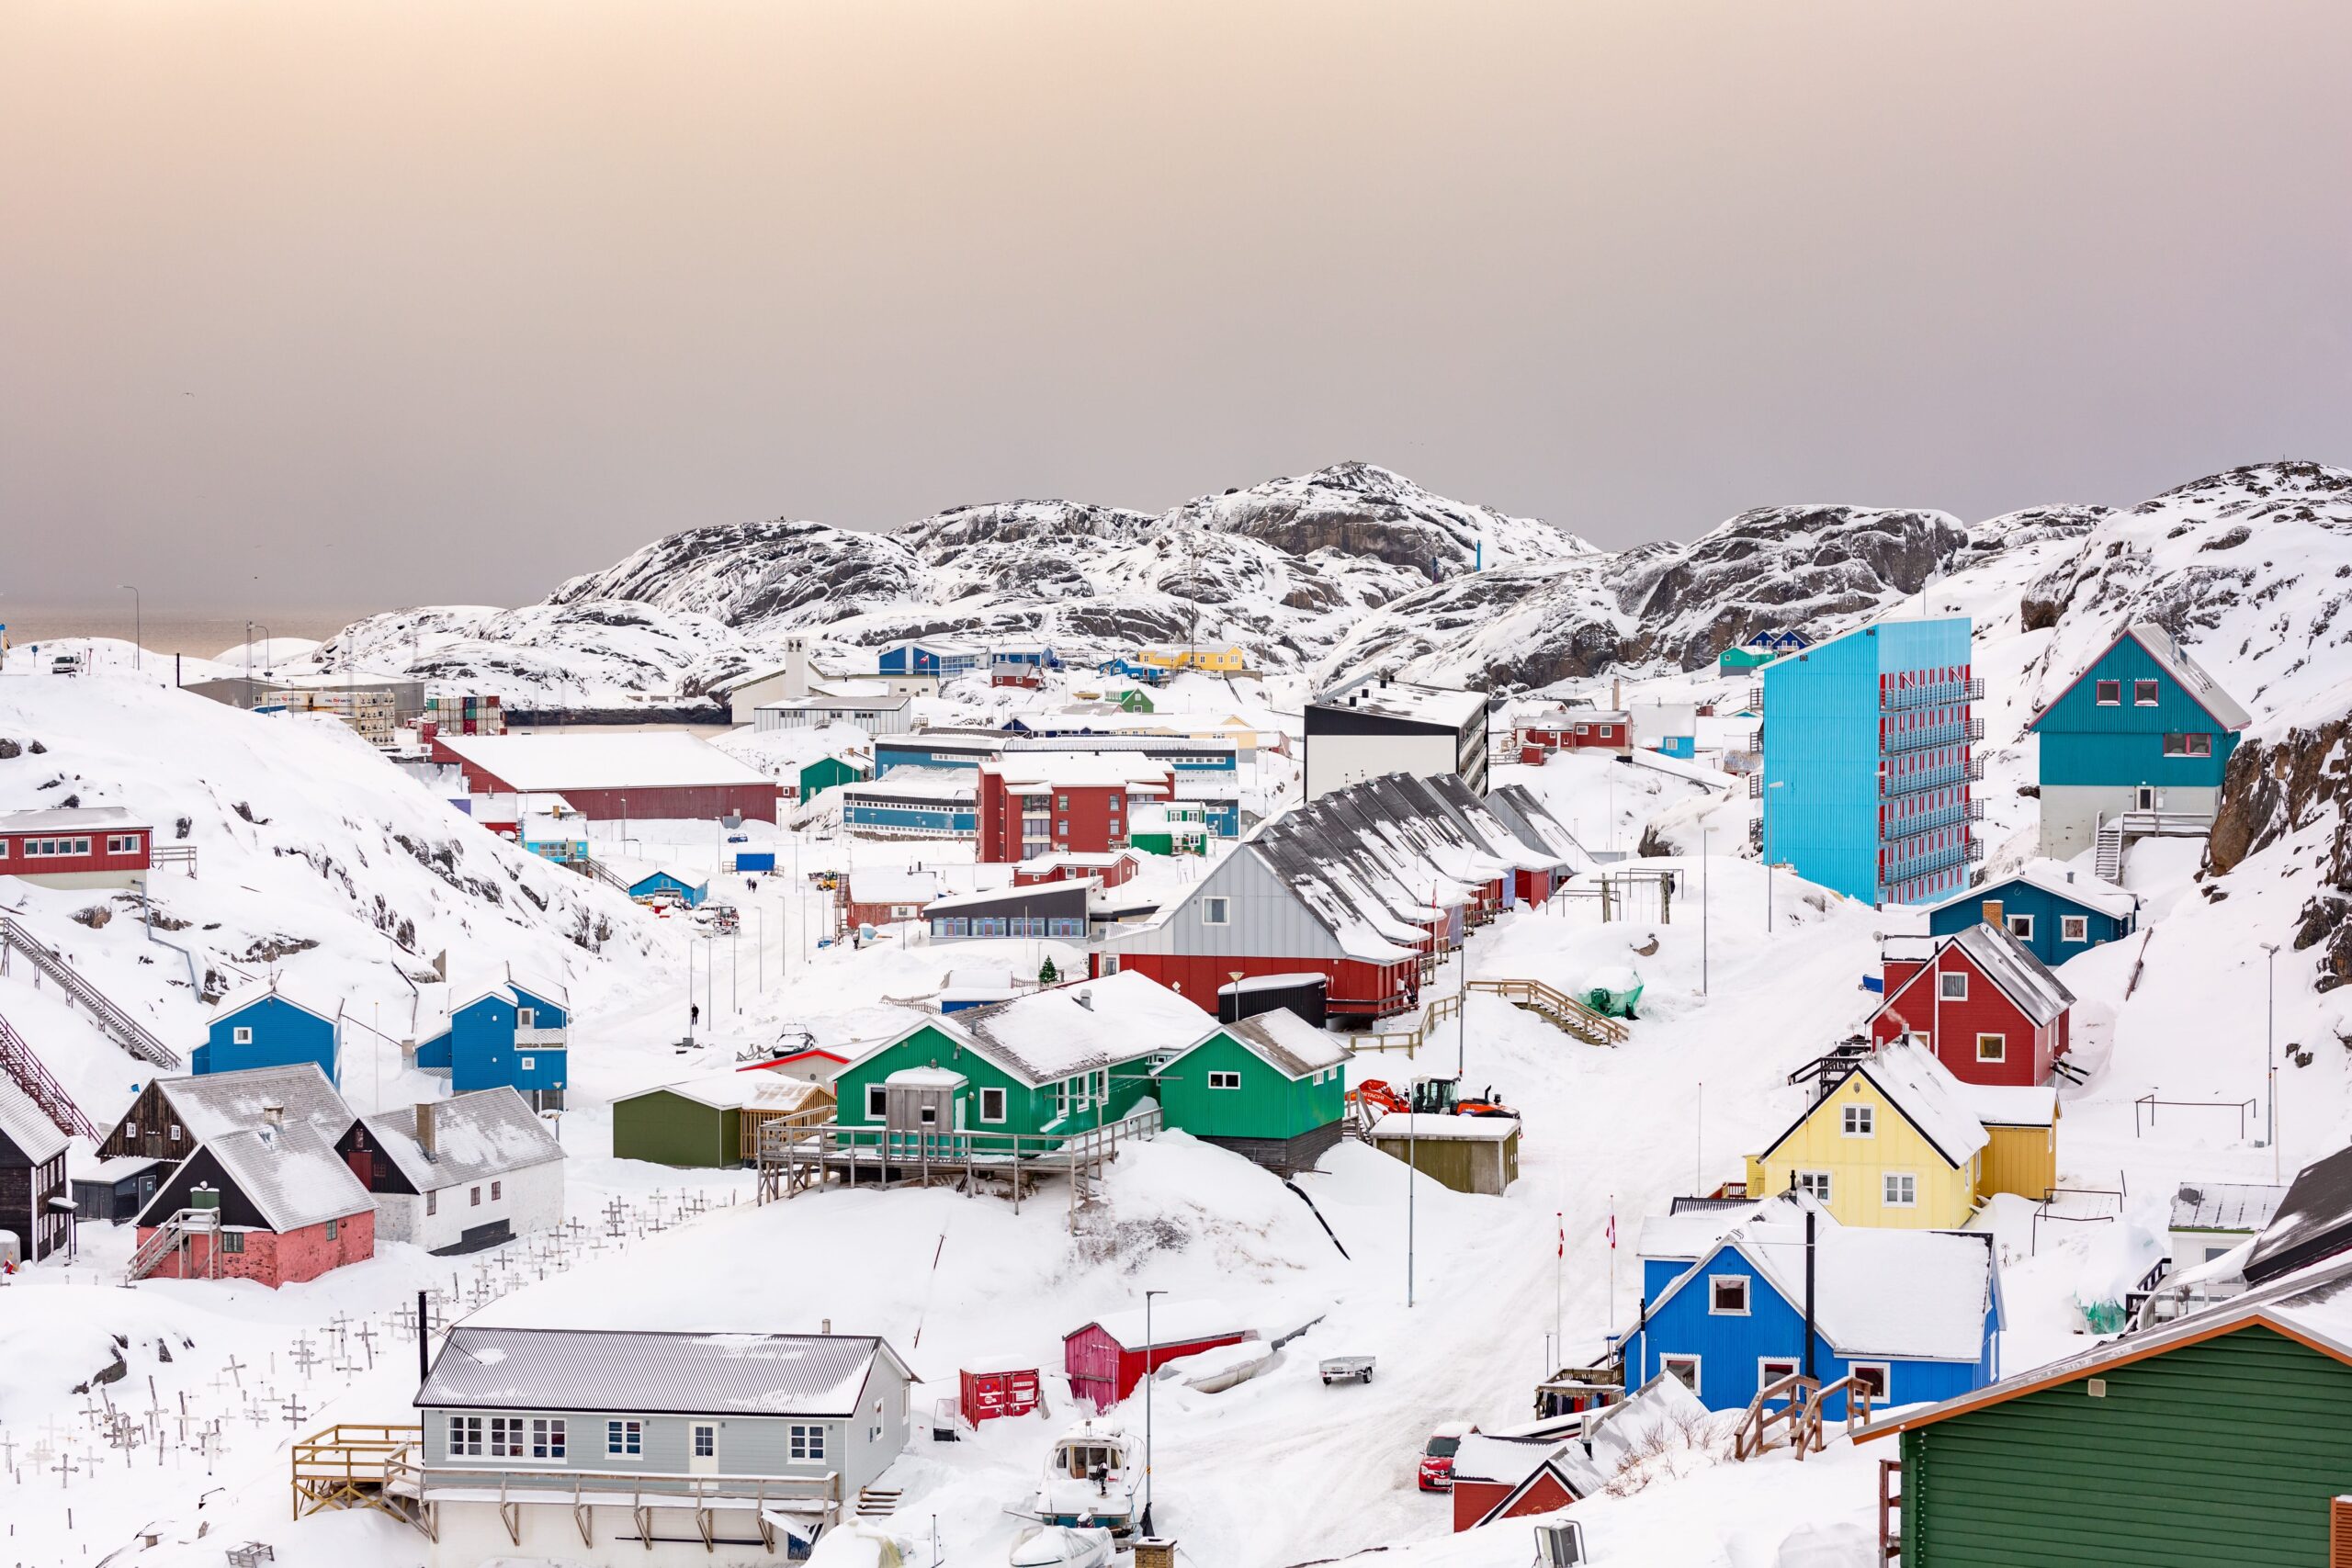 View over the town of Maniitsoq, Greenland